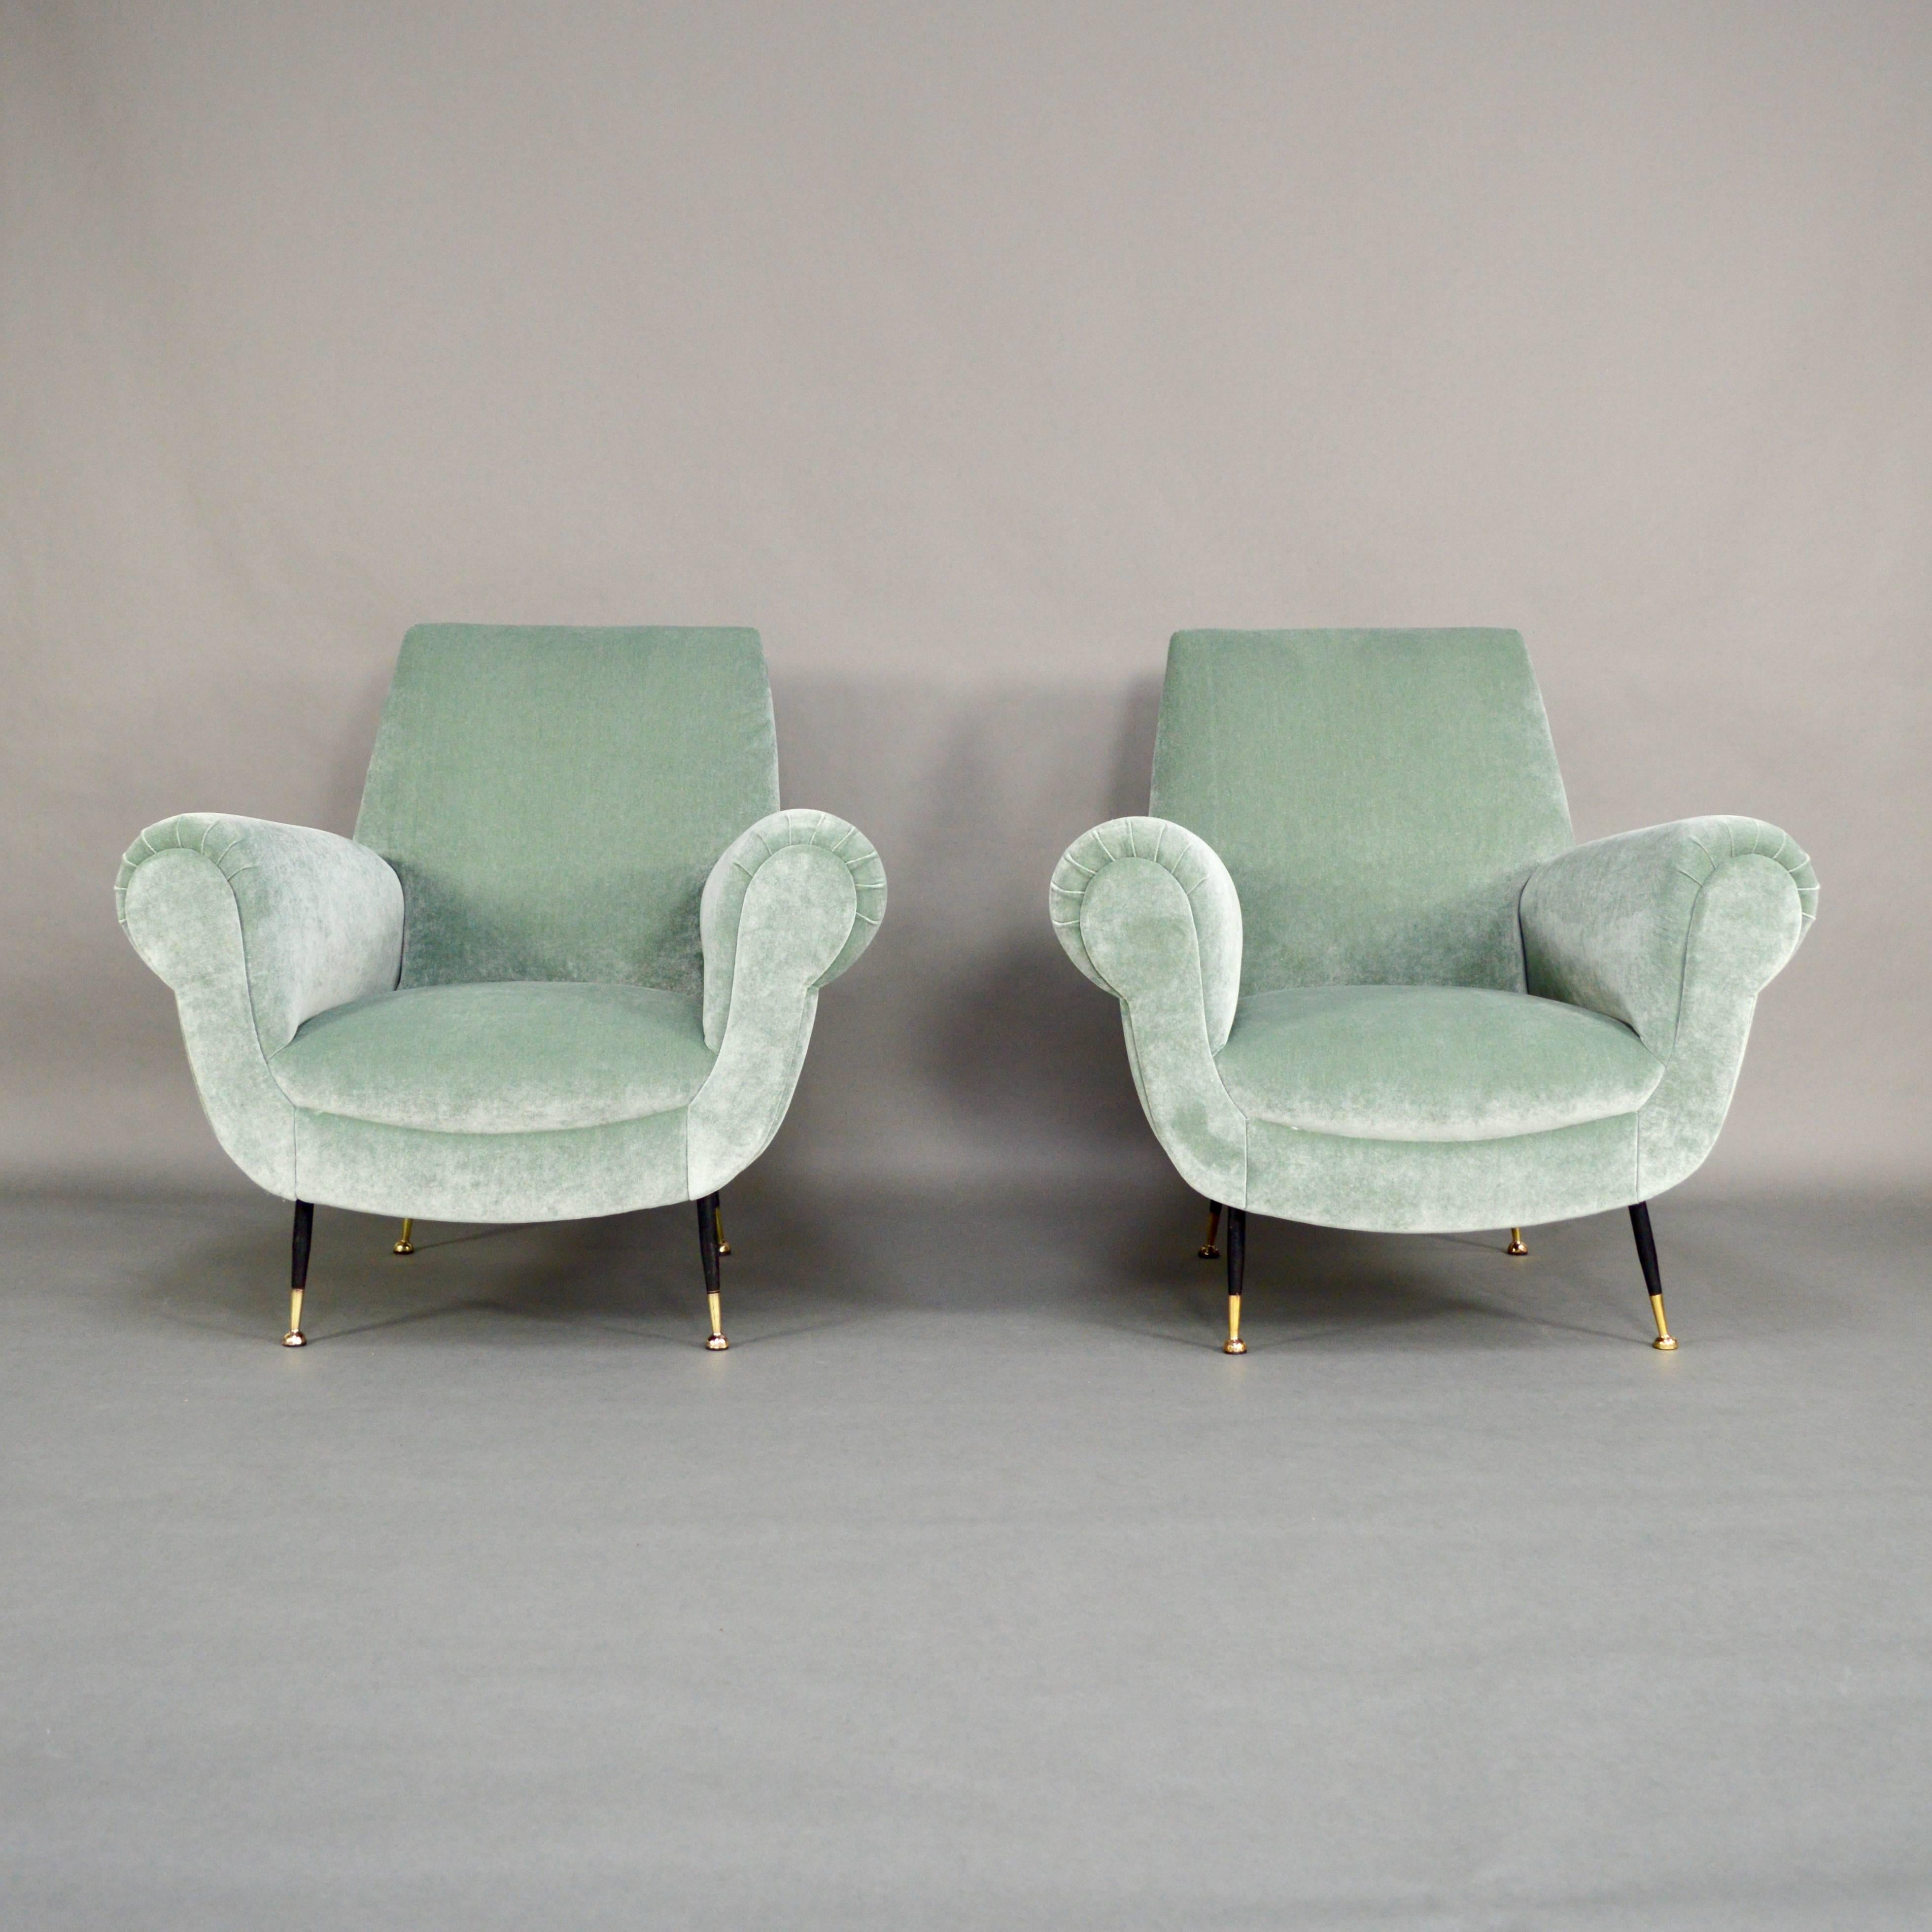 Iconic pair of club lounge chairs by Gigi Radice.
The chairs have been completely refurbished with new foam interior and a beautiful pastel green velvet fabric by JAB Urban Velvets.
The legs are made of brass and black lacquered metal. The brass